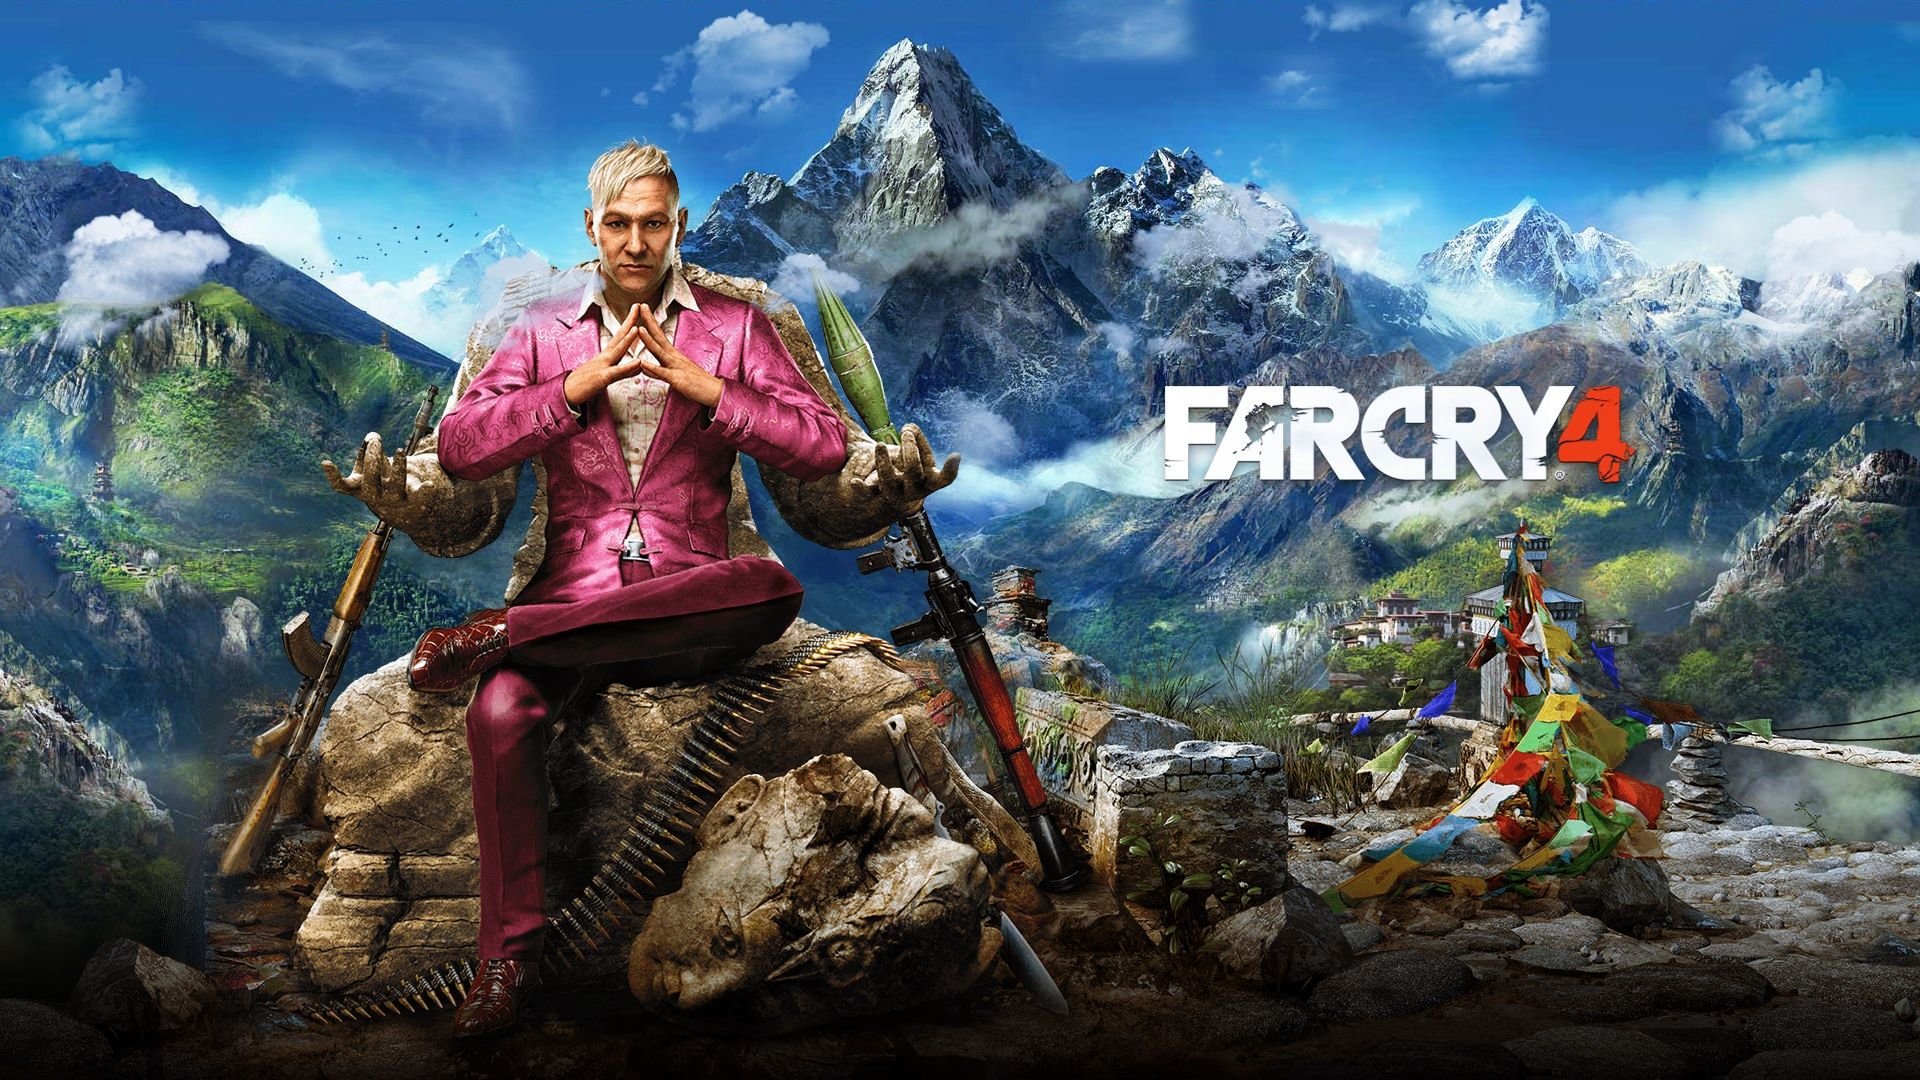 Download full hd 1920x1080 Far Cry 4 computer wallpaper ID:10704 for free